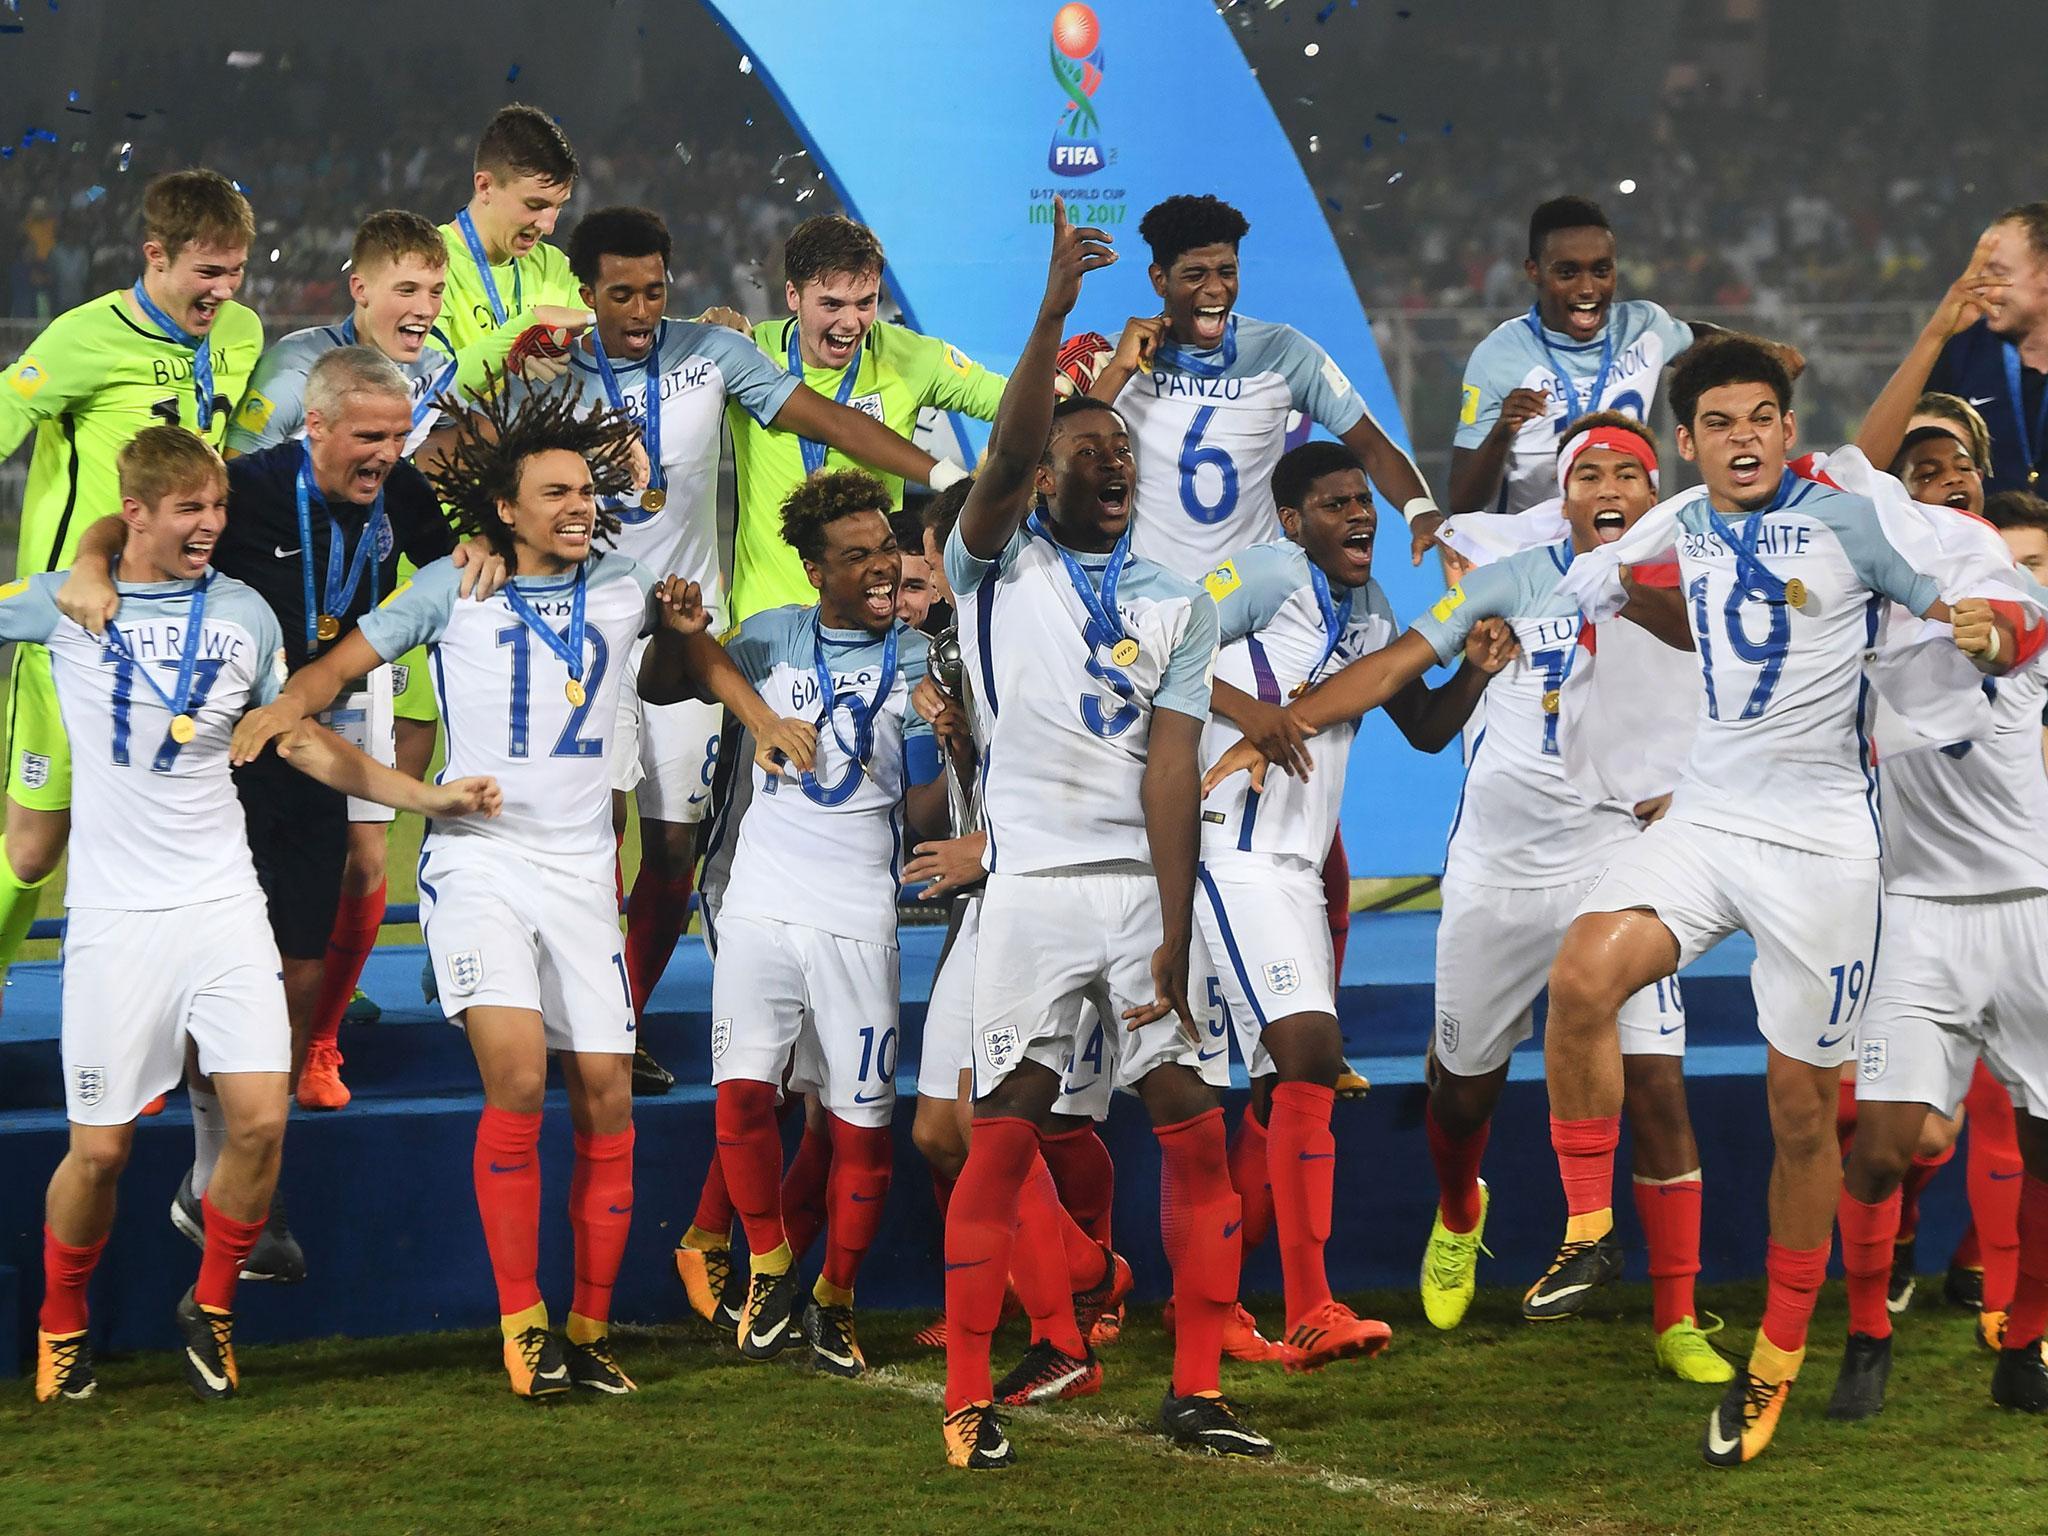 England U17s manager backs World Cup winning heroes to get their Premier League chance